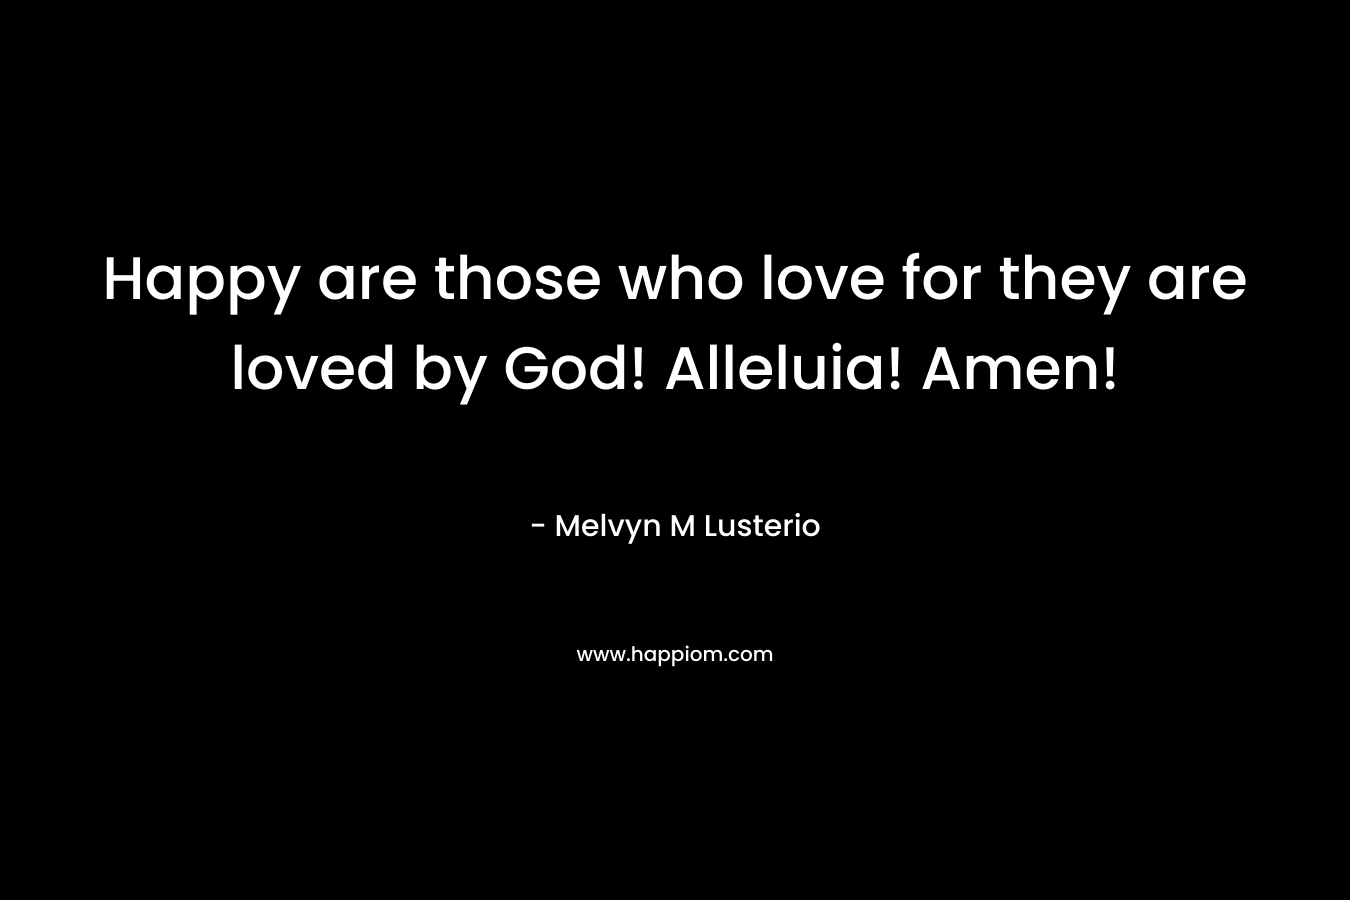 Happy are those who love for they are loved by God! Alleluia! Amen! – Melvyn M Lusterio